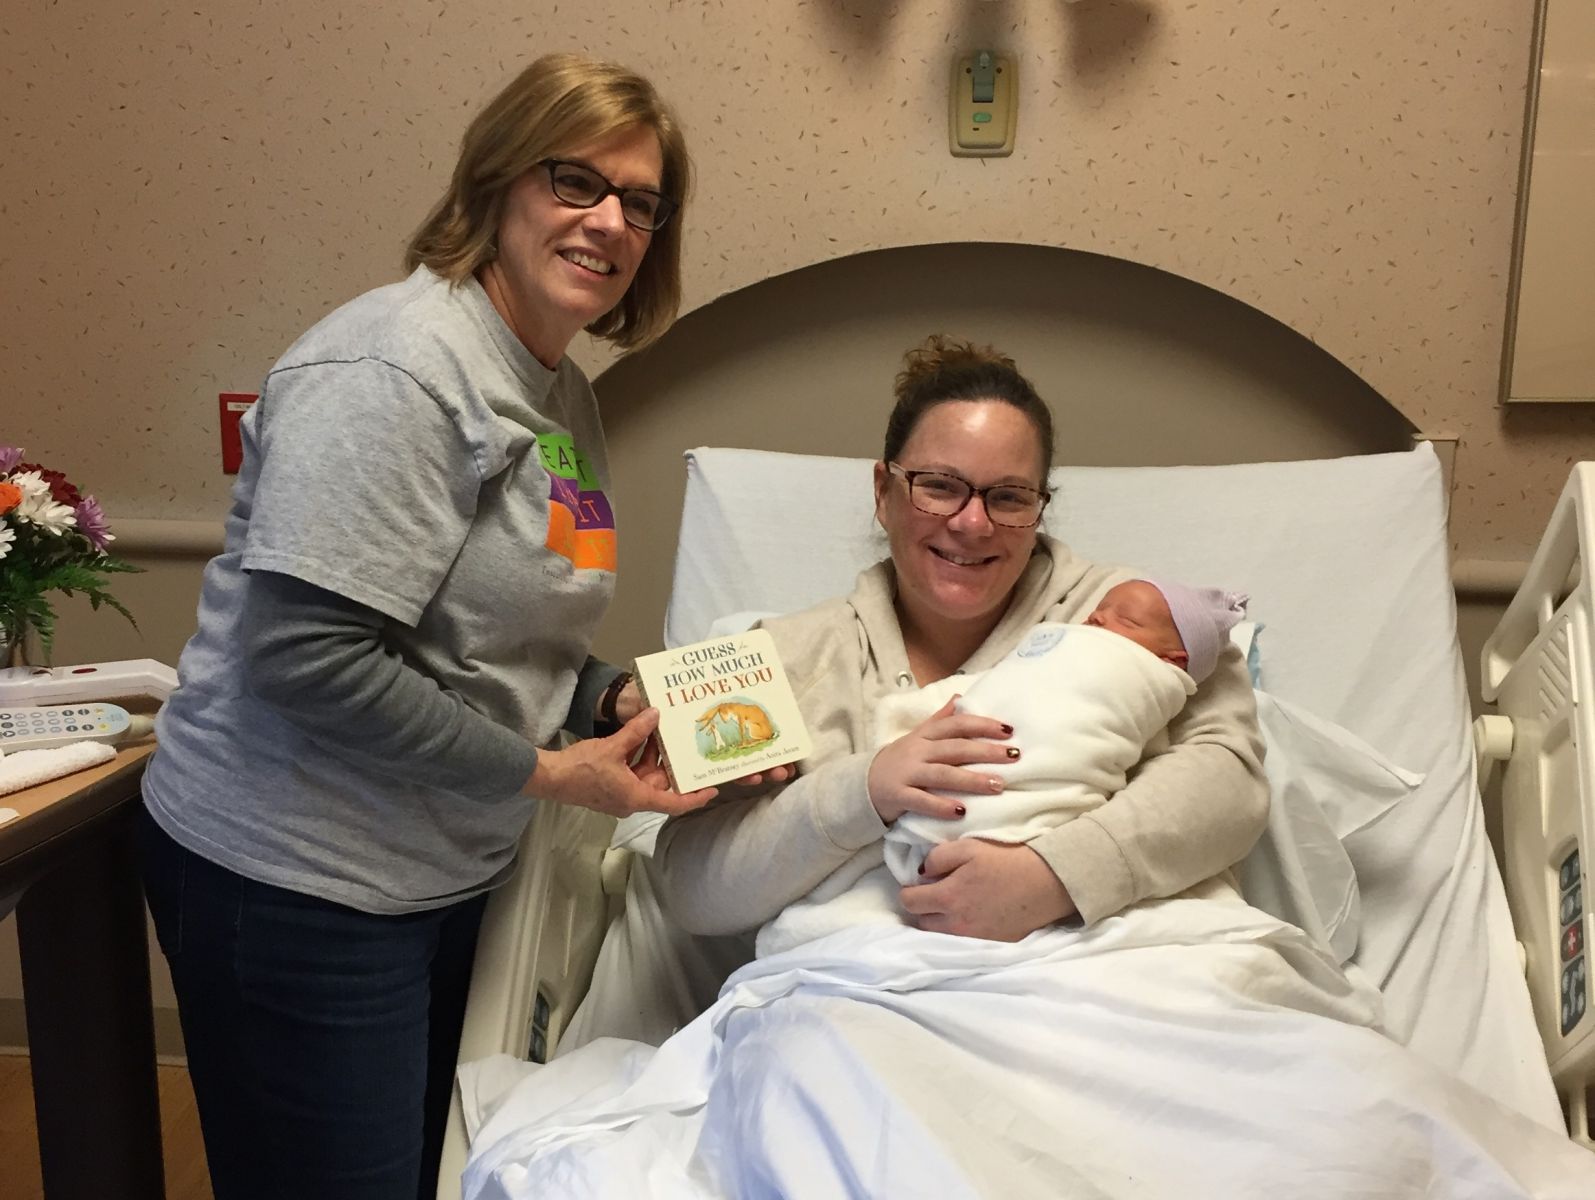 Woman in hospital holding a newborn baby while a library staff member hands her a book for the new baby.